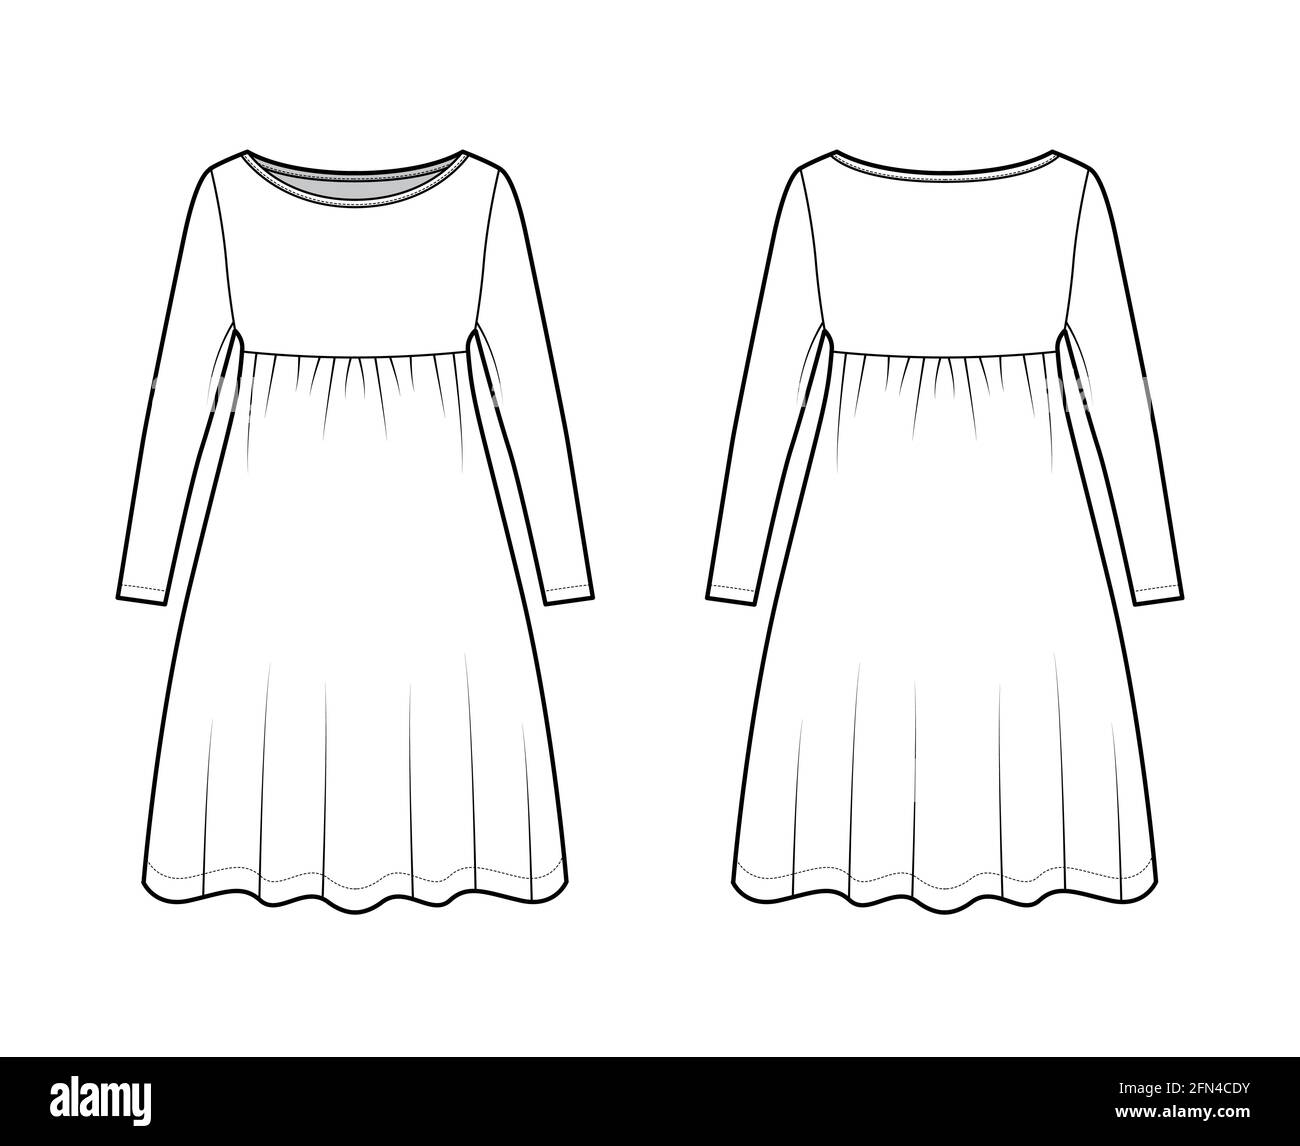 Dress babydoll technical fashion illustration with long sleeves, oversized body, knee length A-line skirt, boat neck. Flat apparel front, back, white color style. Women, men unisex CAD mockup Stock Vector